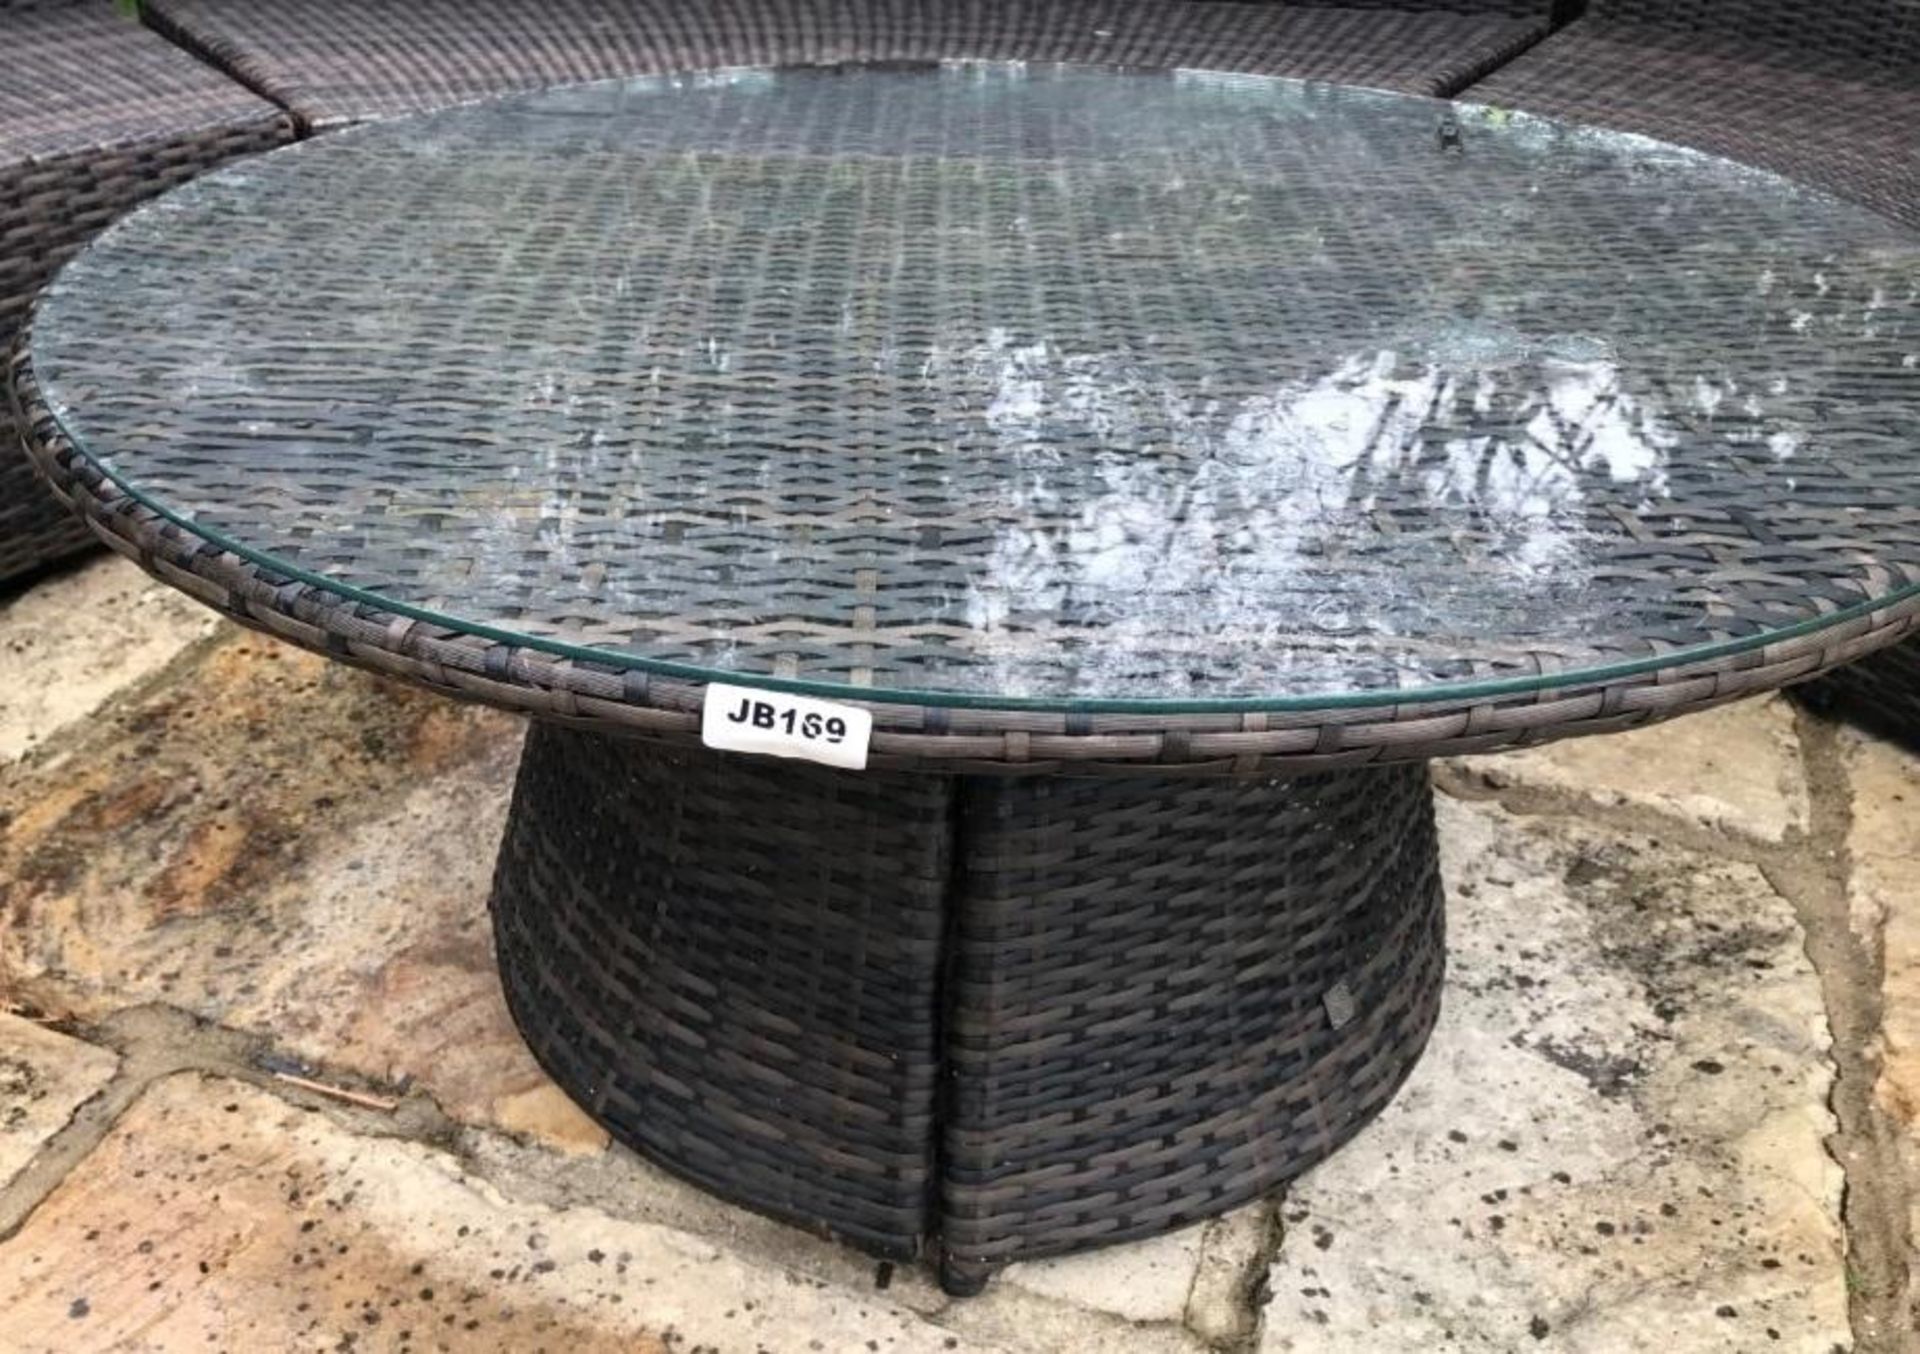 1 x Kensington Wicker/Rattan Round Glass Topped Lounge Table - Ref: JB169 - Pre-Owned - NO VAT ON - Image 2 of 3